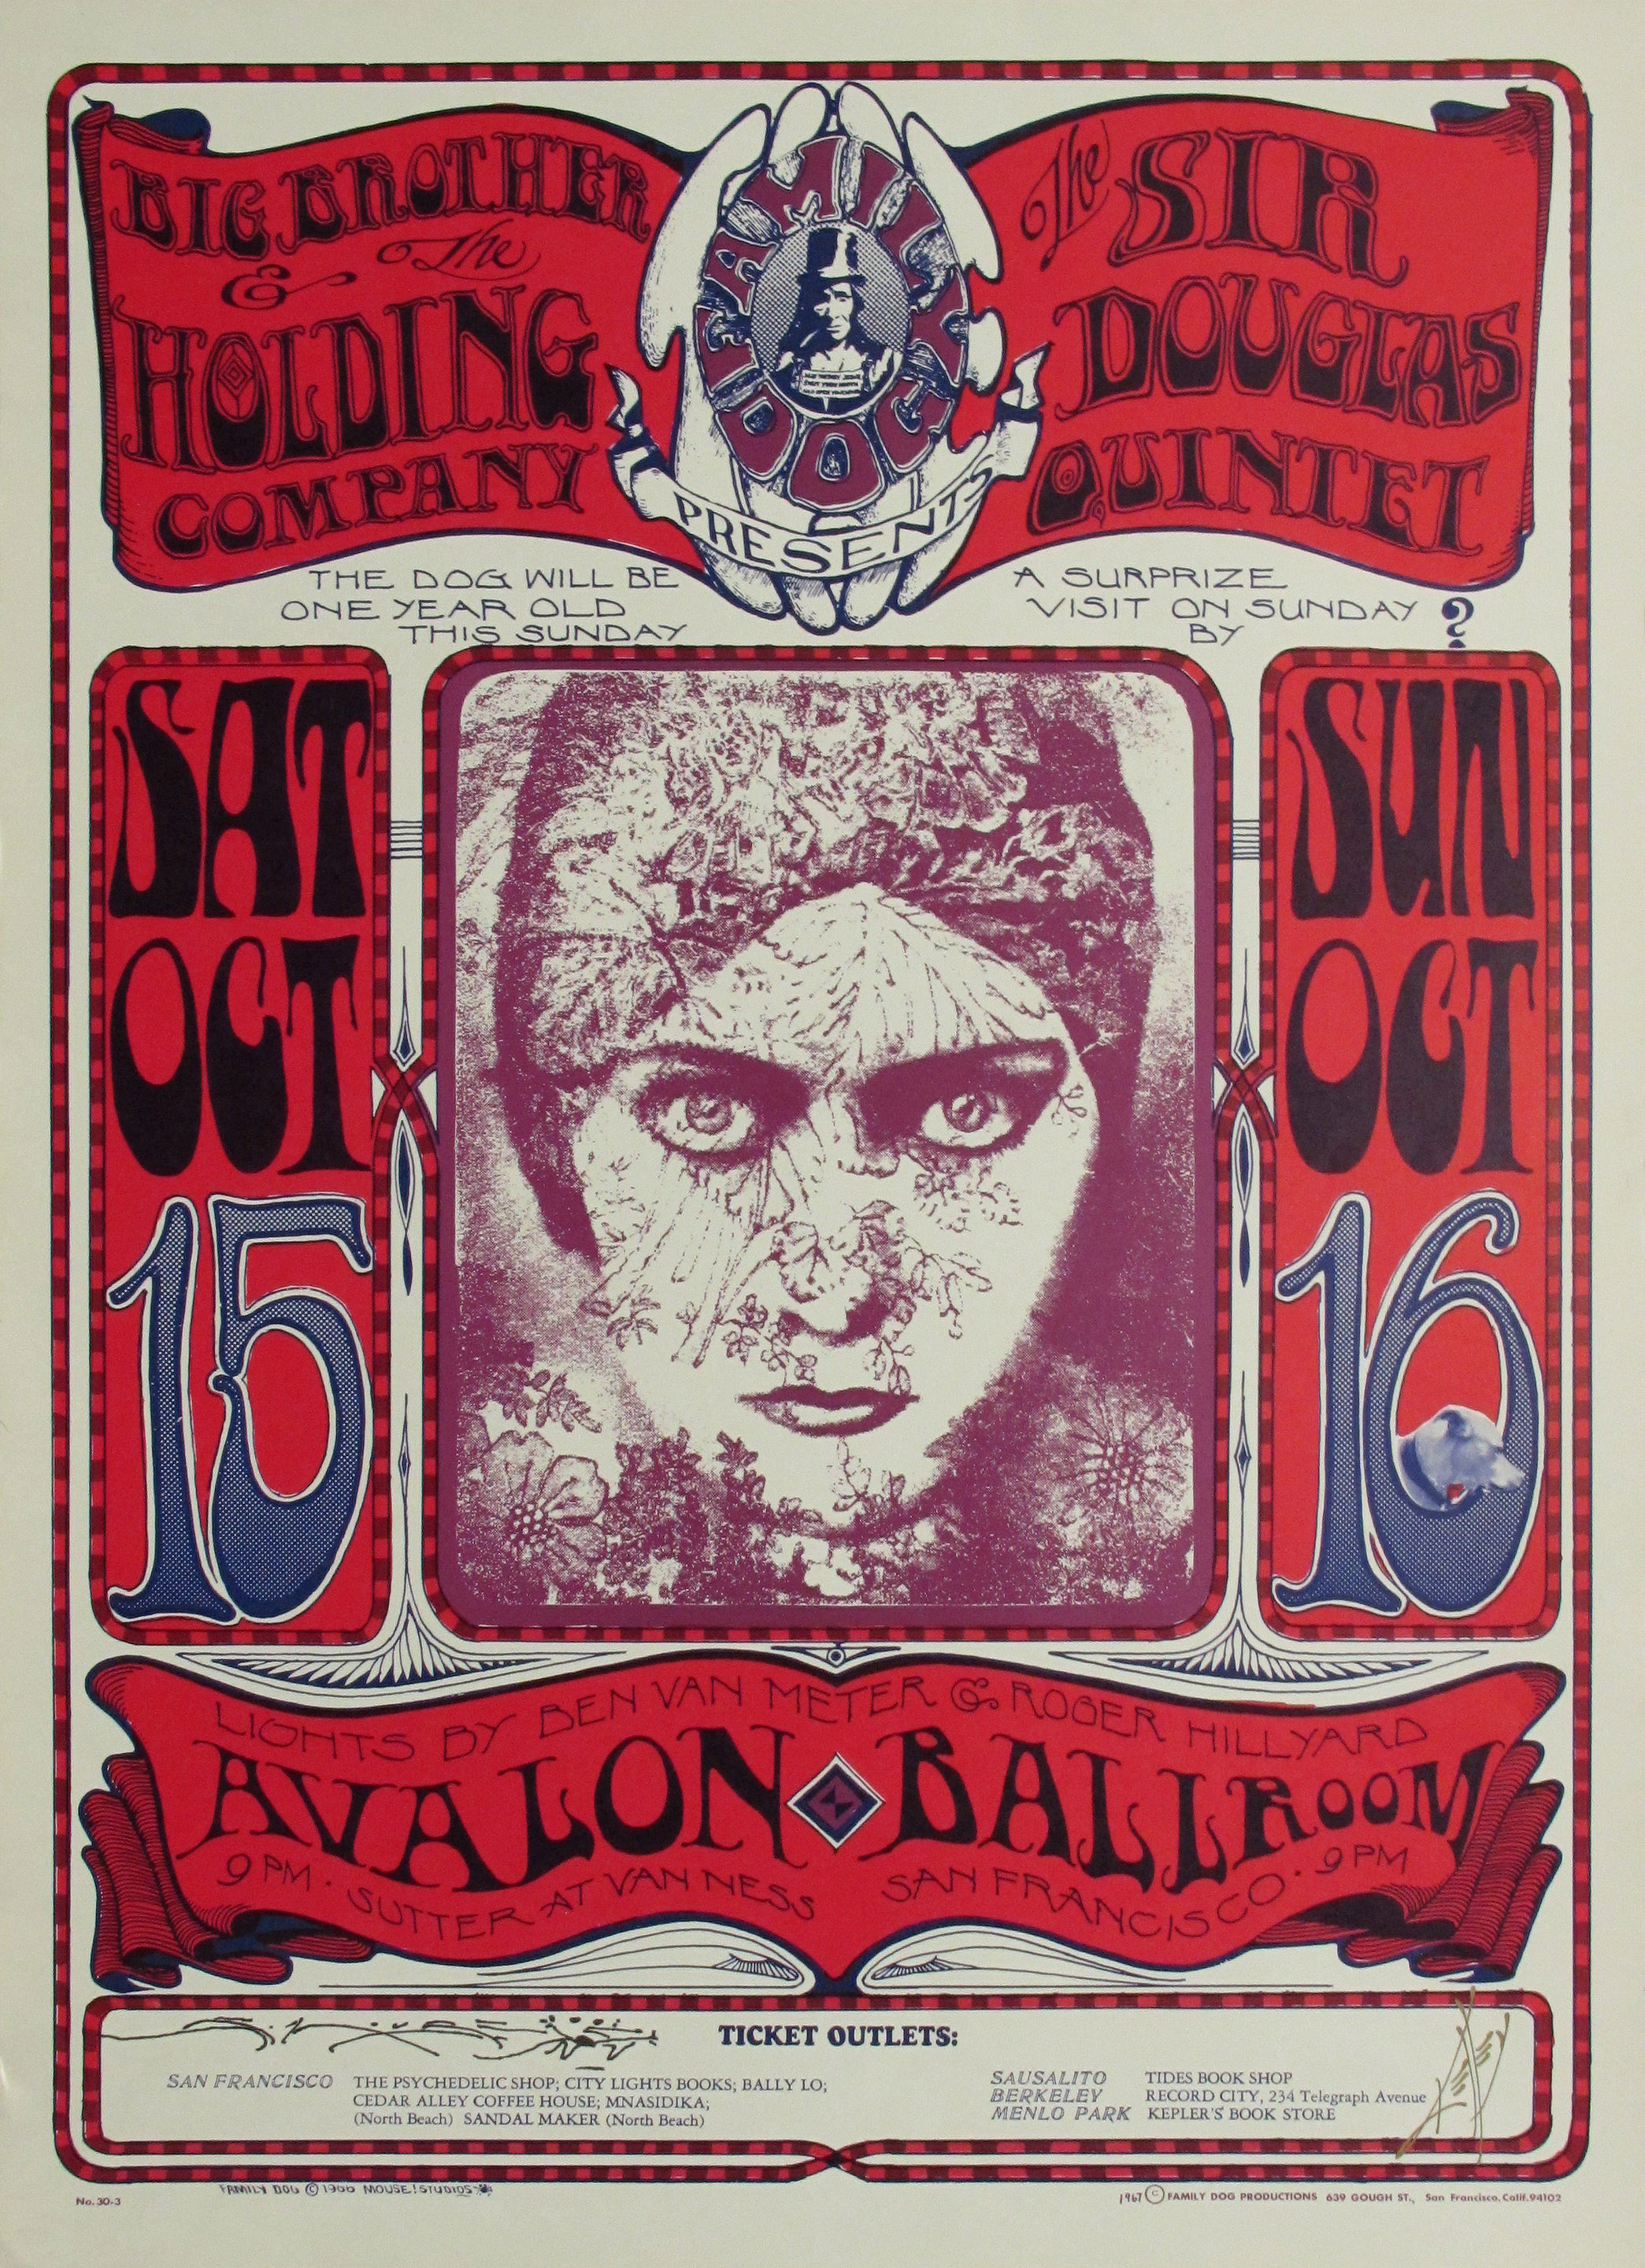 Big Brother and the Holding Company & Sir Douglas Quintet